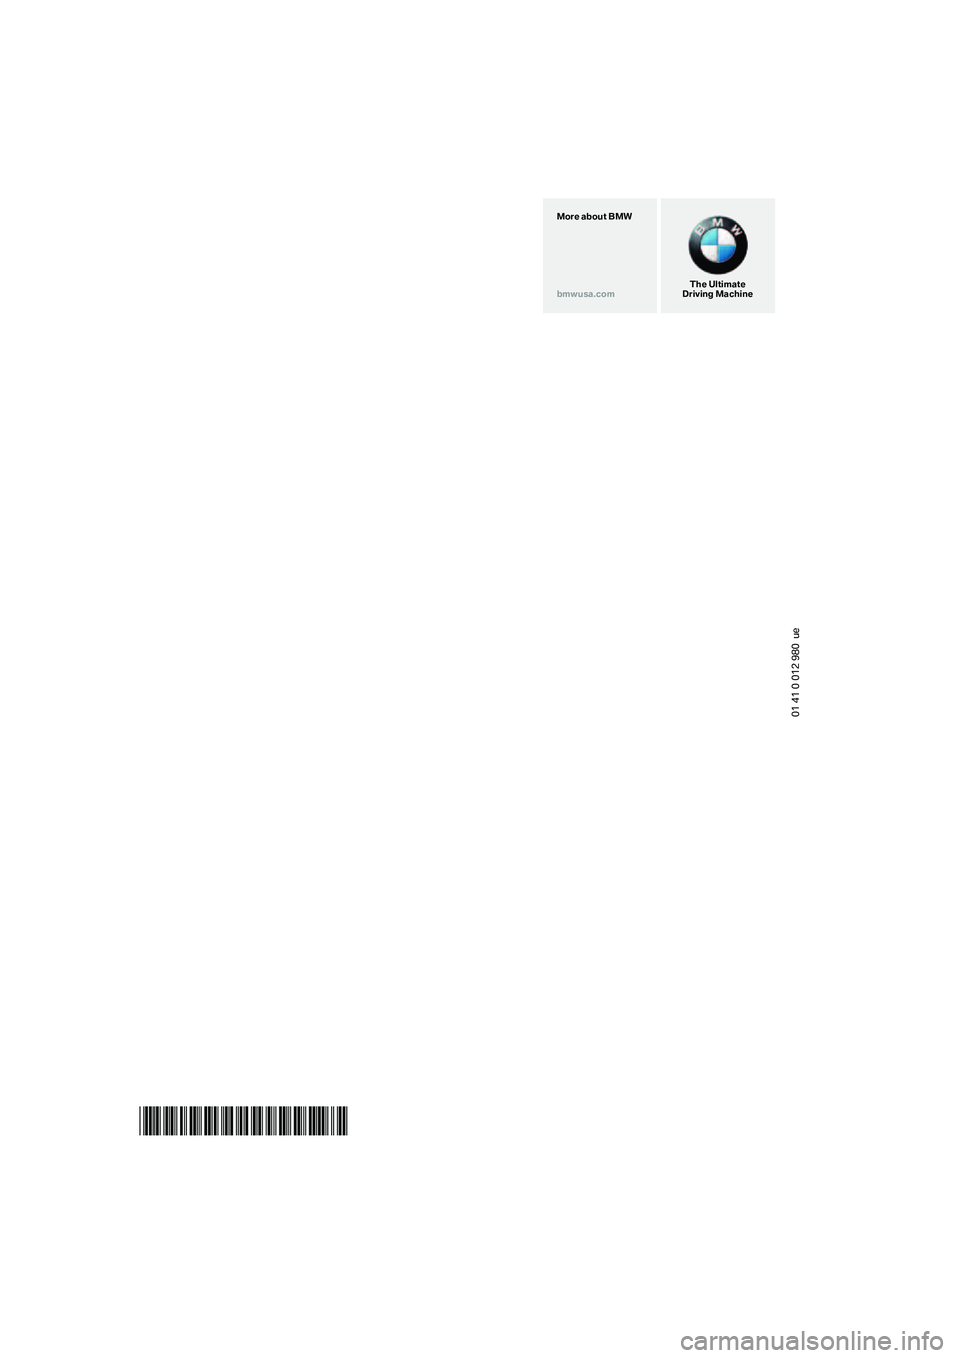 BMW Z4 M ROADSTER&COUPE 2007 Service Manual 
01 41 0 012 980  ue
*BL001298000M*
The Ultimate
Driving Machine
More about BMW
bmwusa.com 